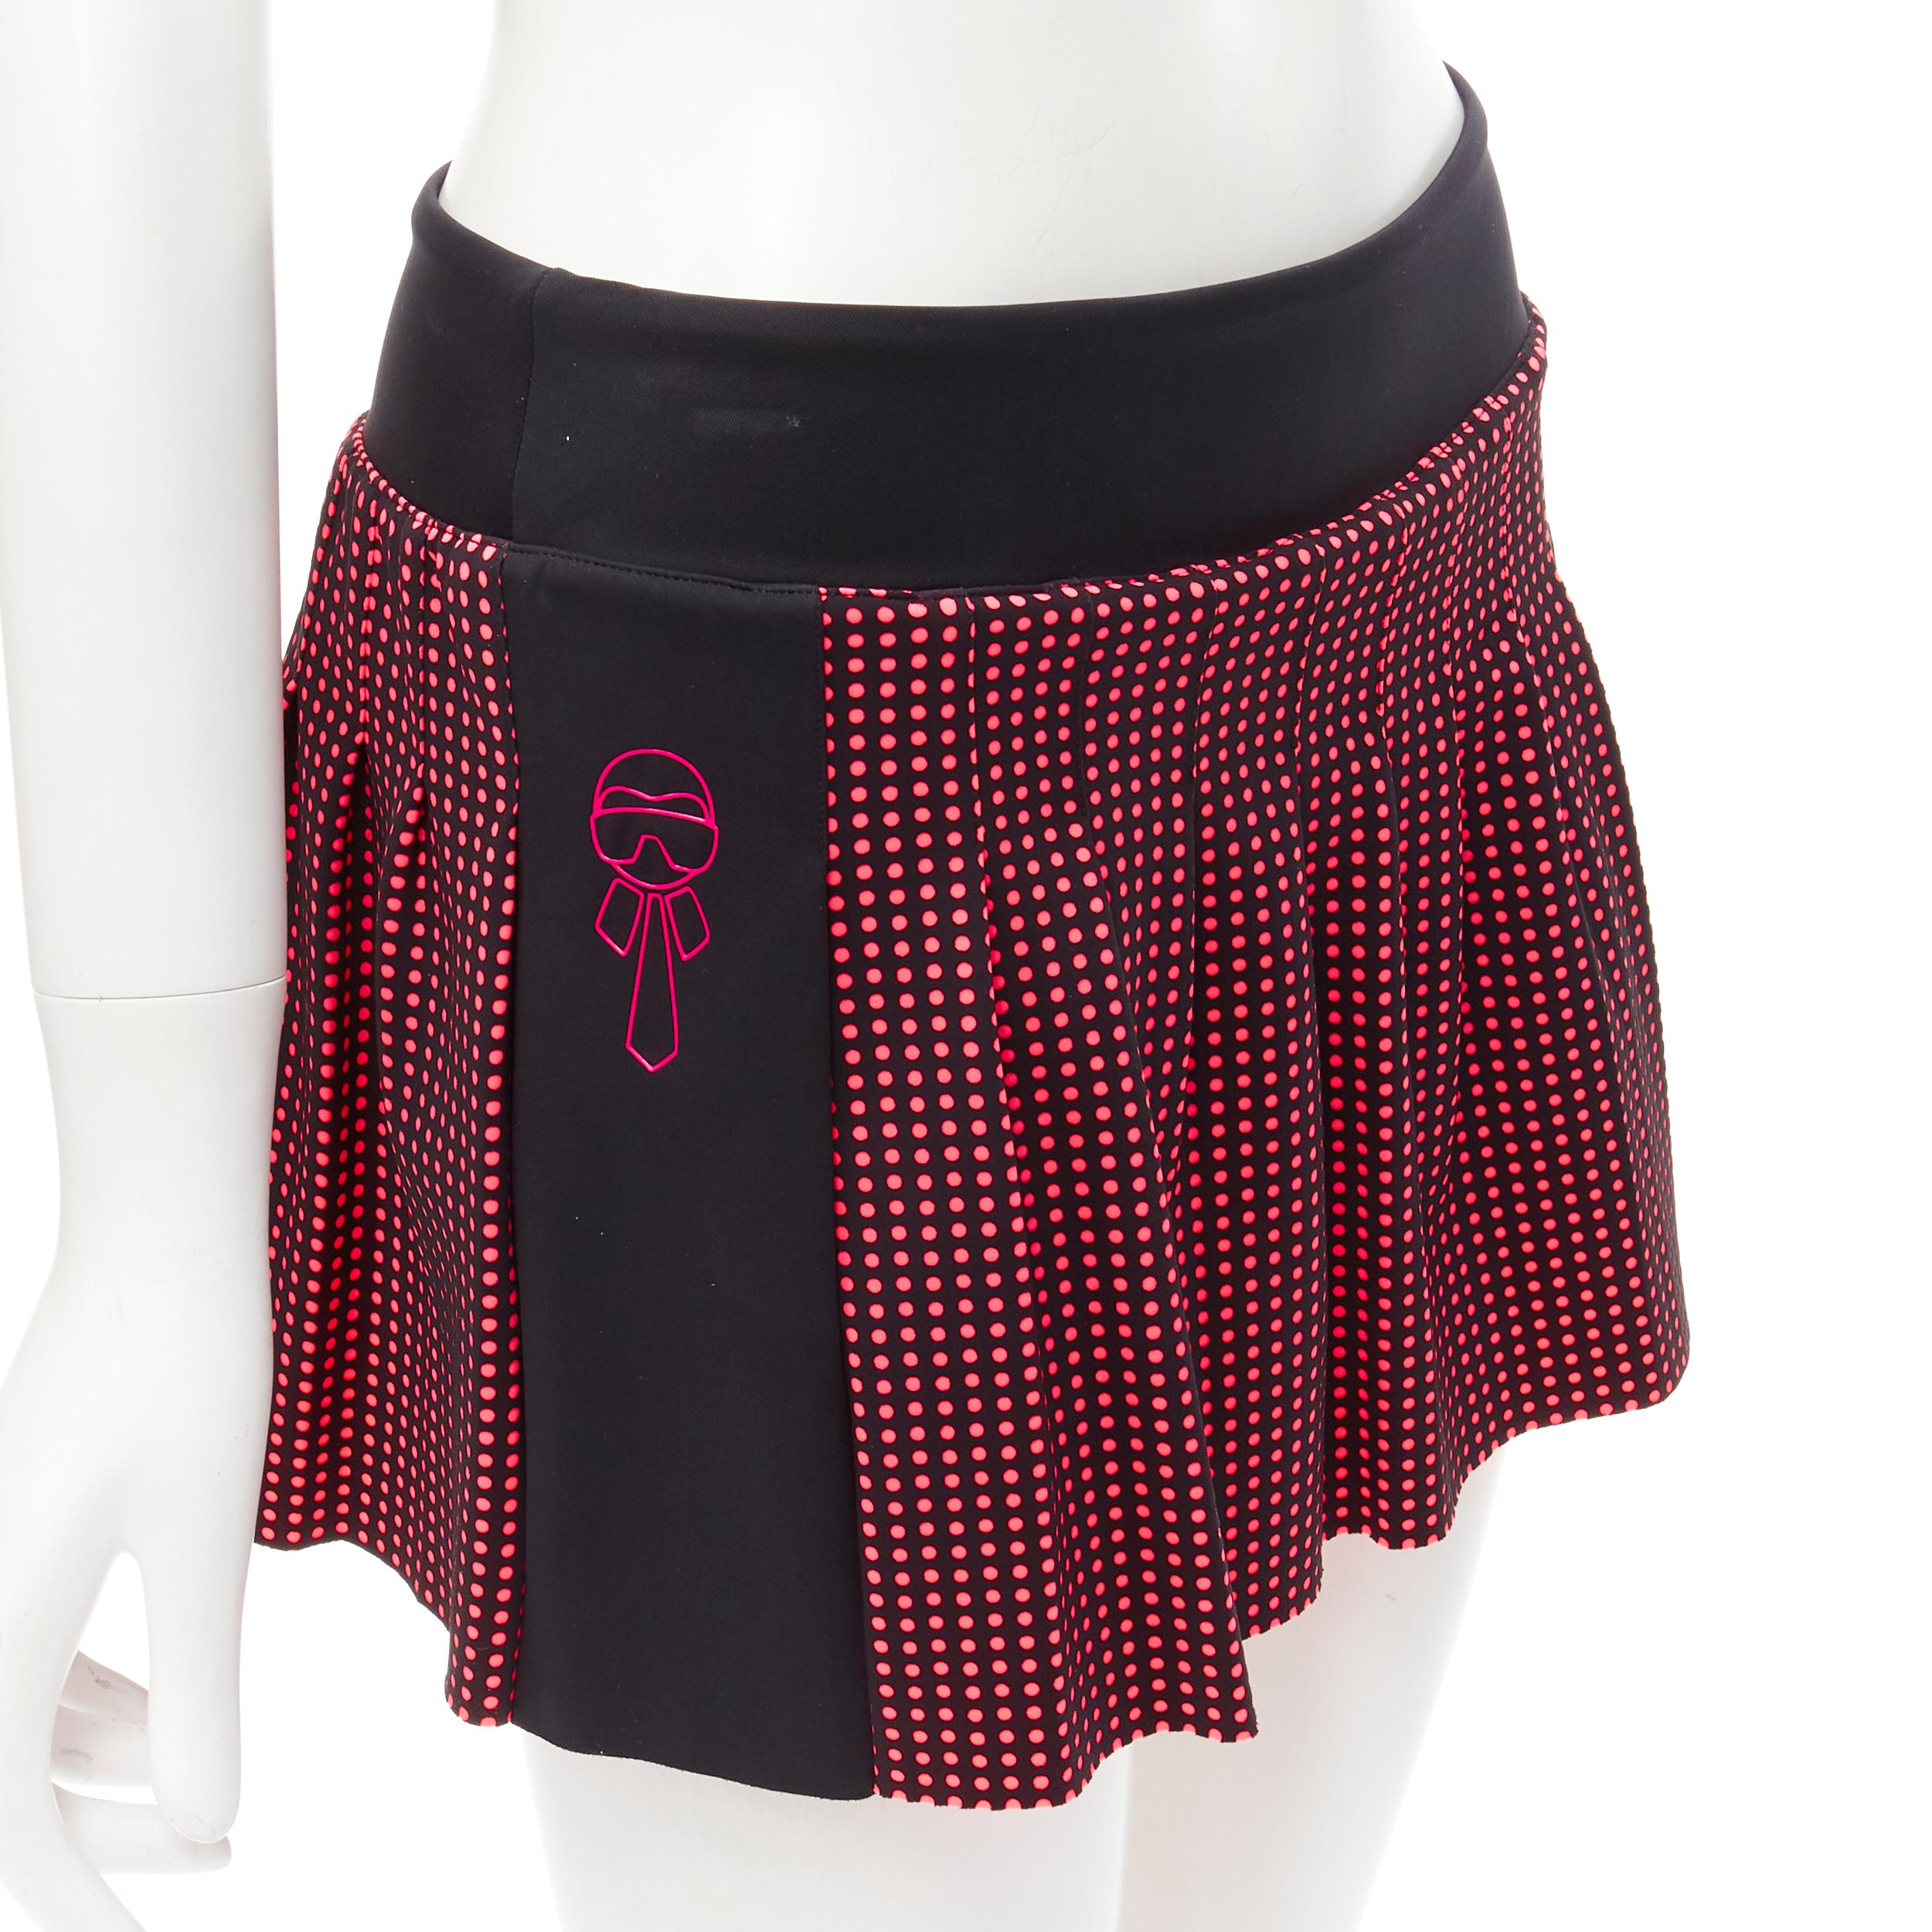 FENDI Activewear Karl Love black pink polka dot lined pleated skirt S 
Reference: ANWU/A00416 
Brand: Fendi 
Collection: Karl Love 
Material: Feels like polyester 
Color: Black 
Pattern: Polka dot 
Closure: Stretch 
Extra Detail: Karl Love print at